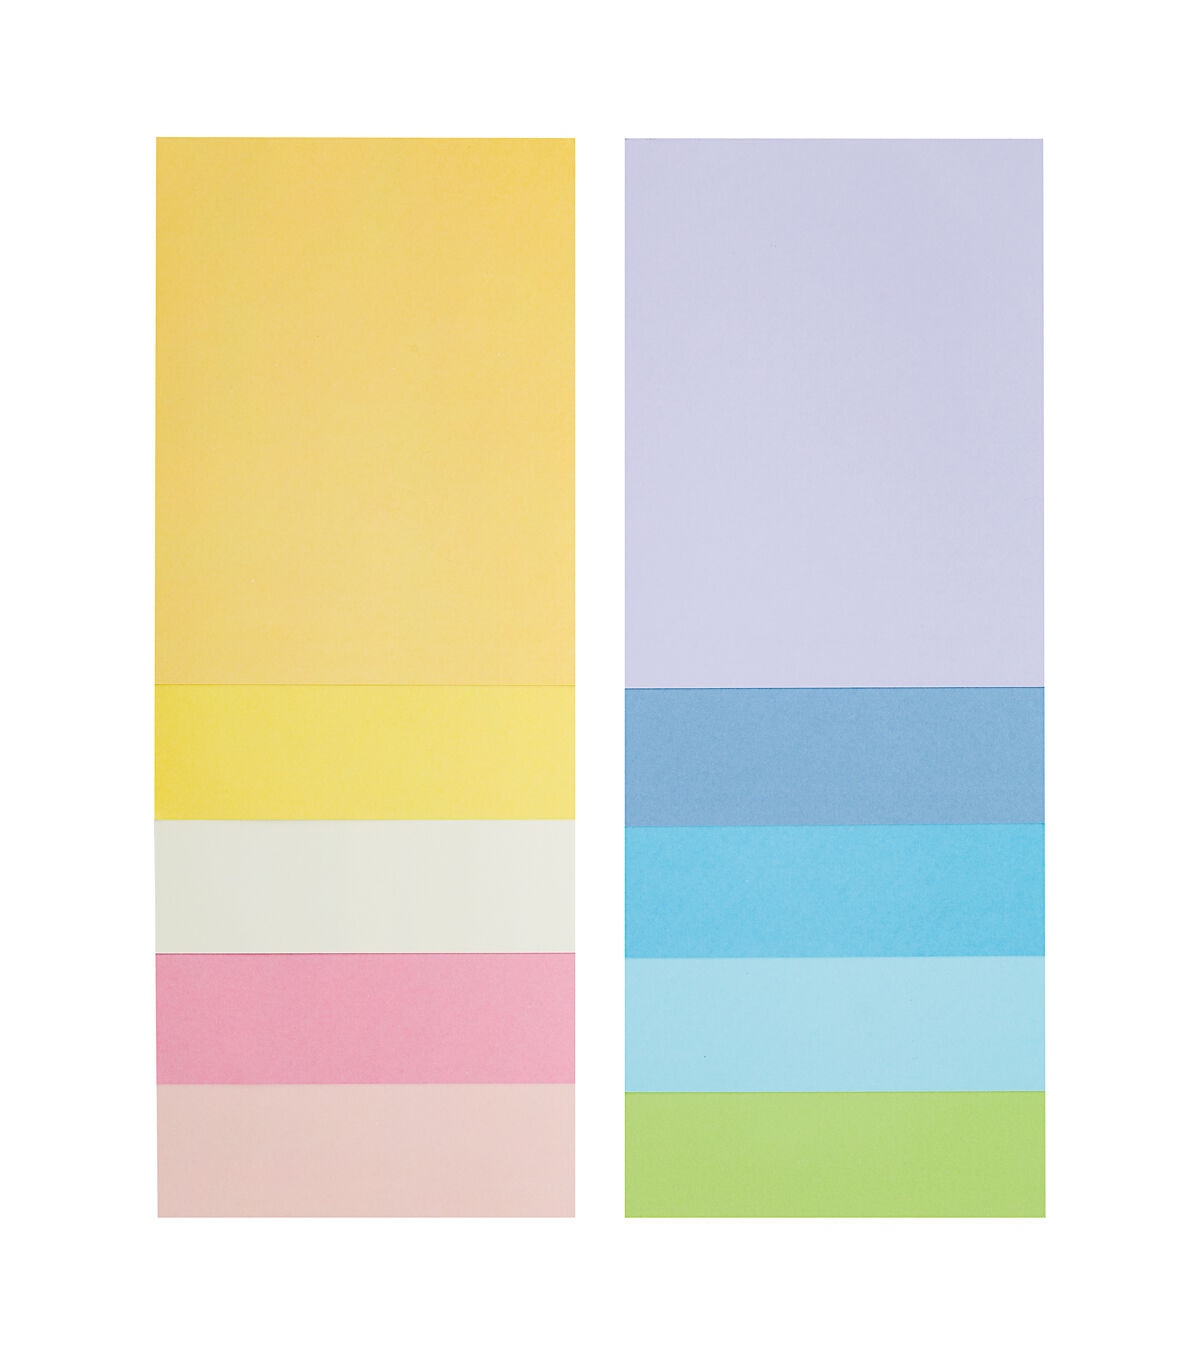 Cardstock 8.5 x 11 Paper Pack - 110 lb Assorted Pastel Colored Scrapbook Paper - Double Sided Card Stock for Crafts, Embossing, Cardmaking - 100